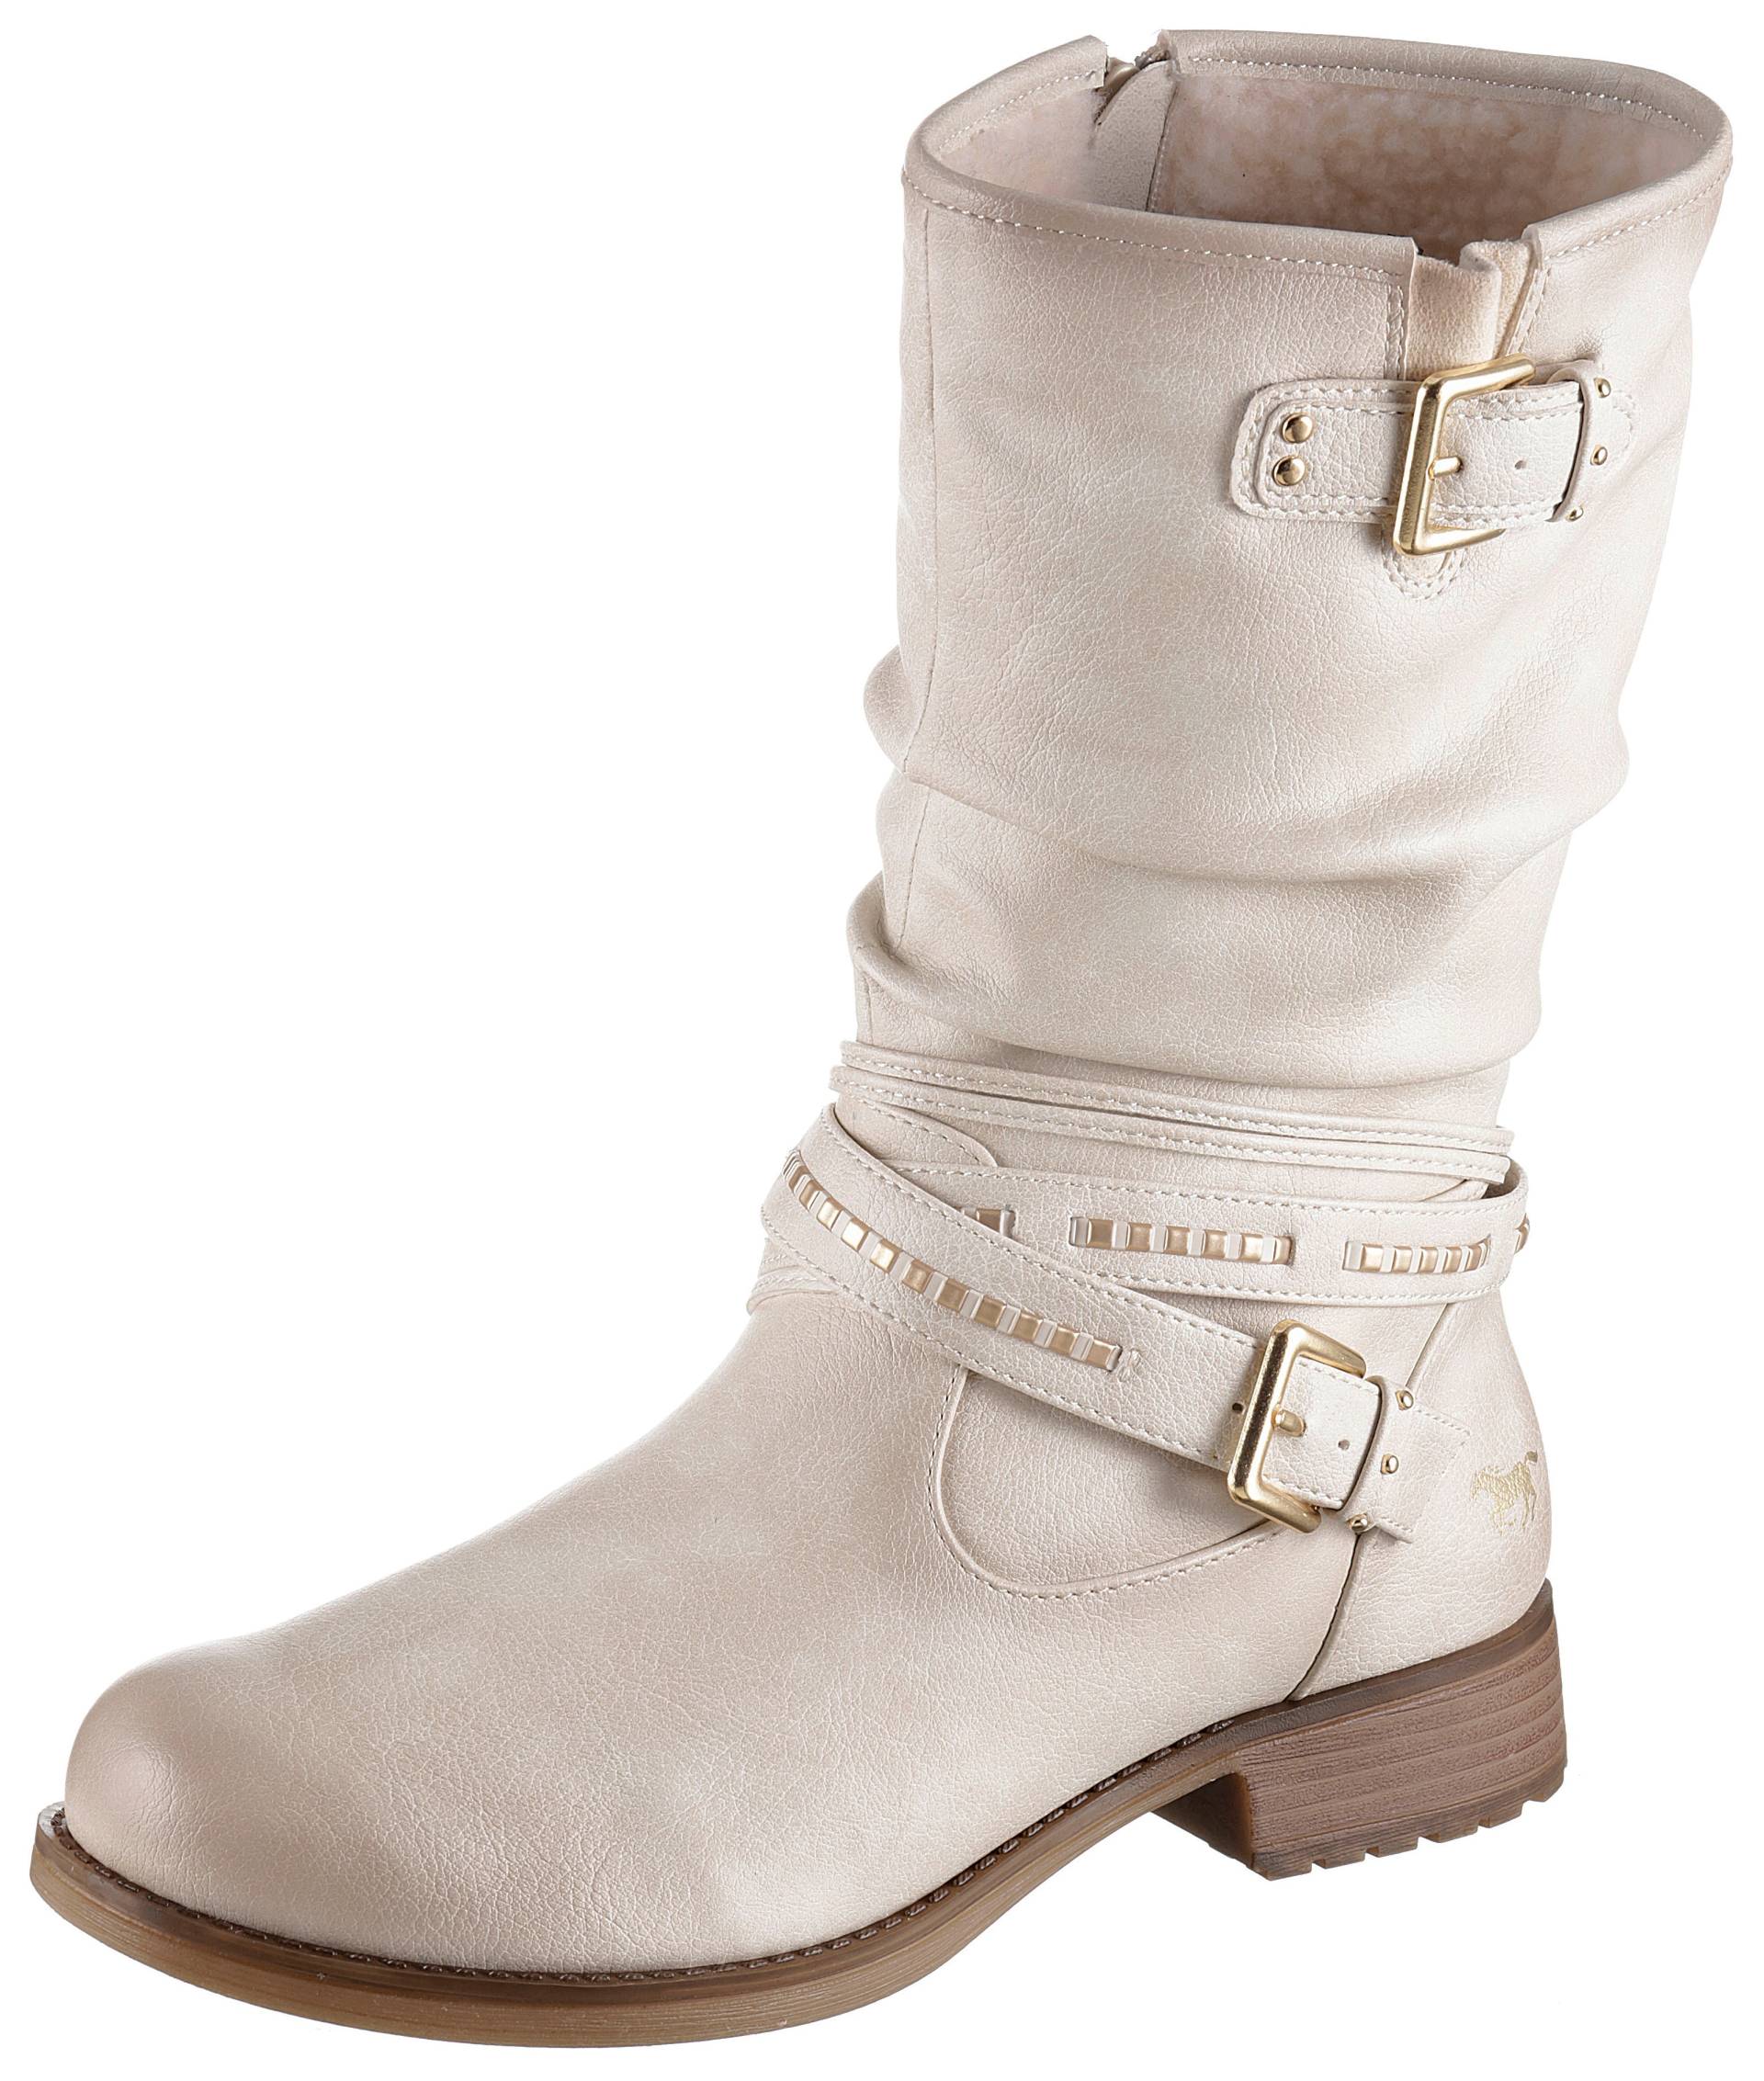 Mustang Shoes Winterstiefel von Mustang Shoes